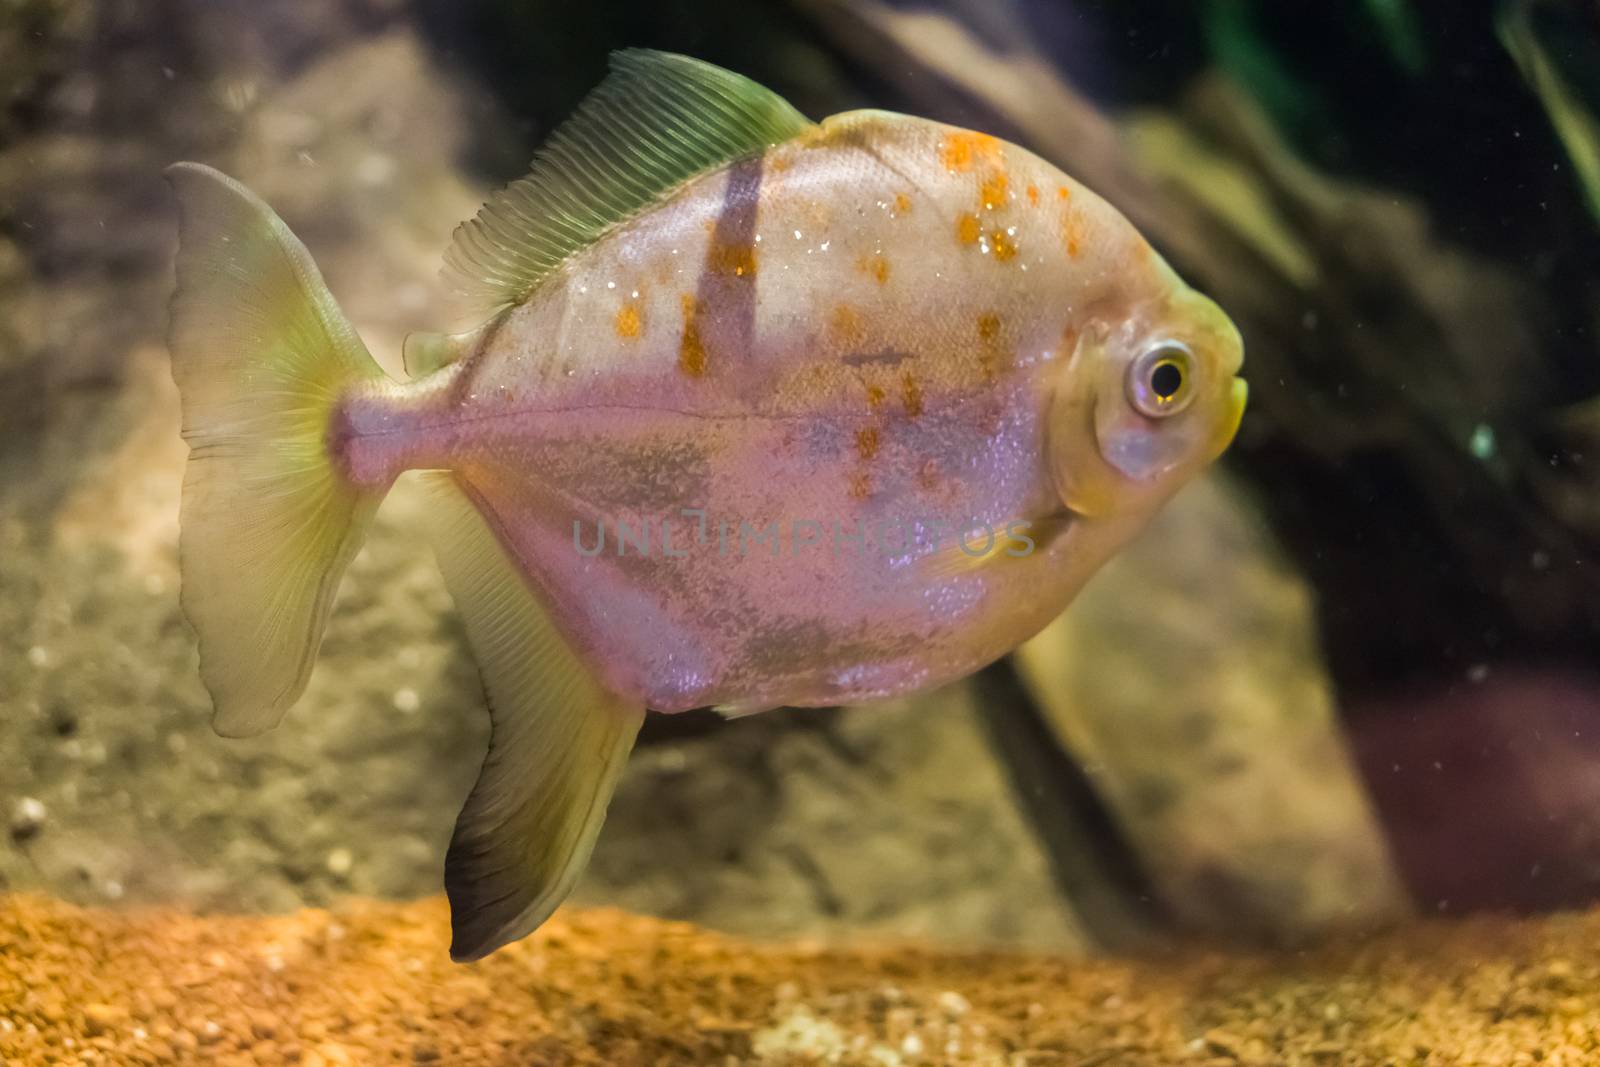 redhook myleus a well-known silver dollar fish species a tropical pet from sout america